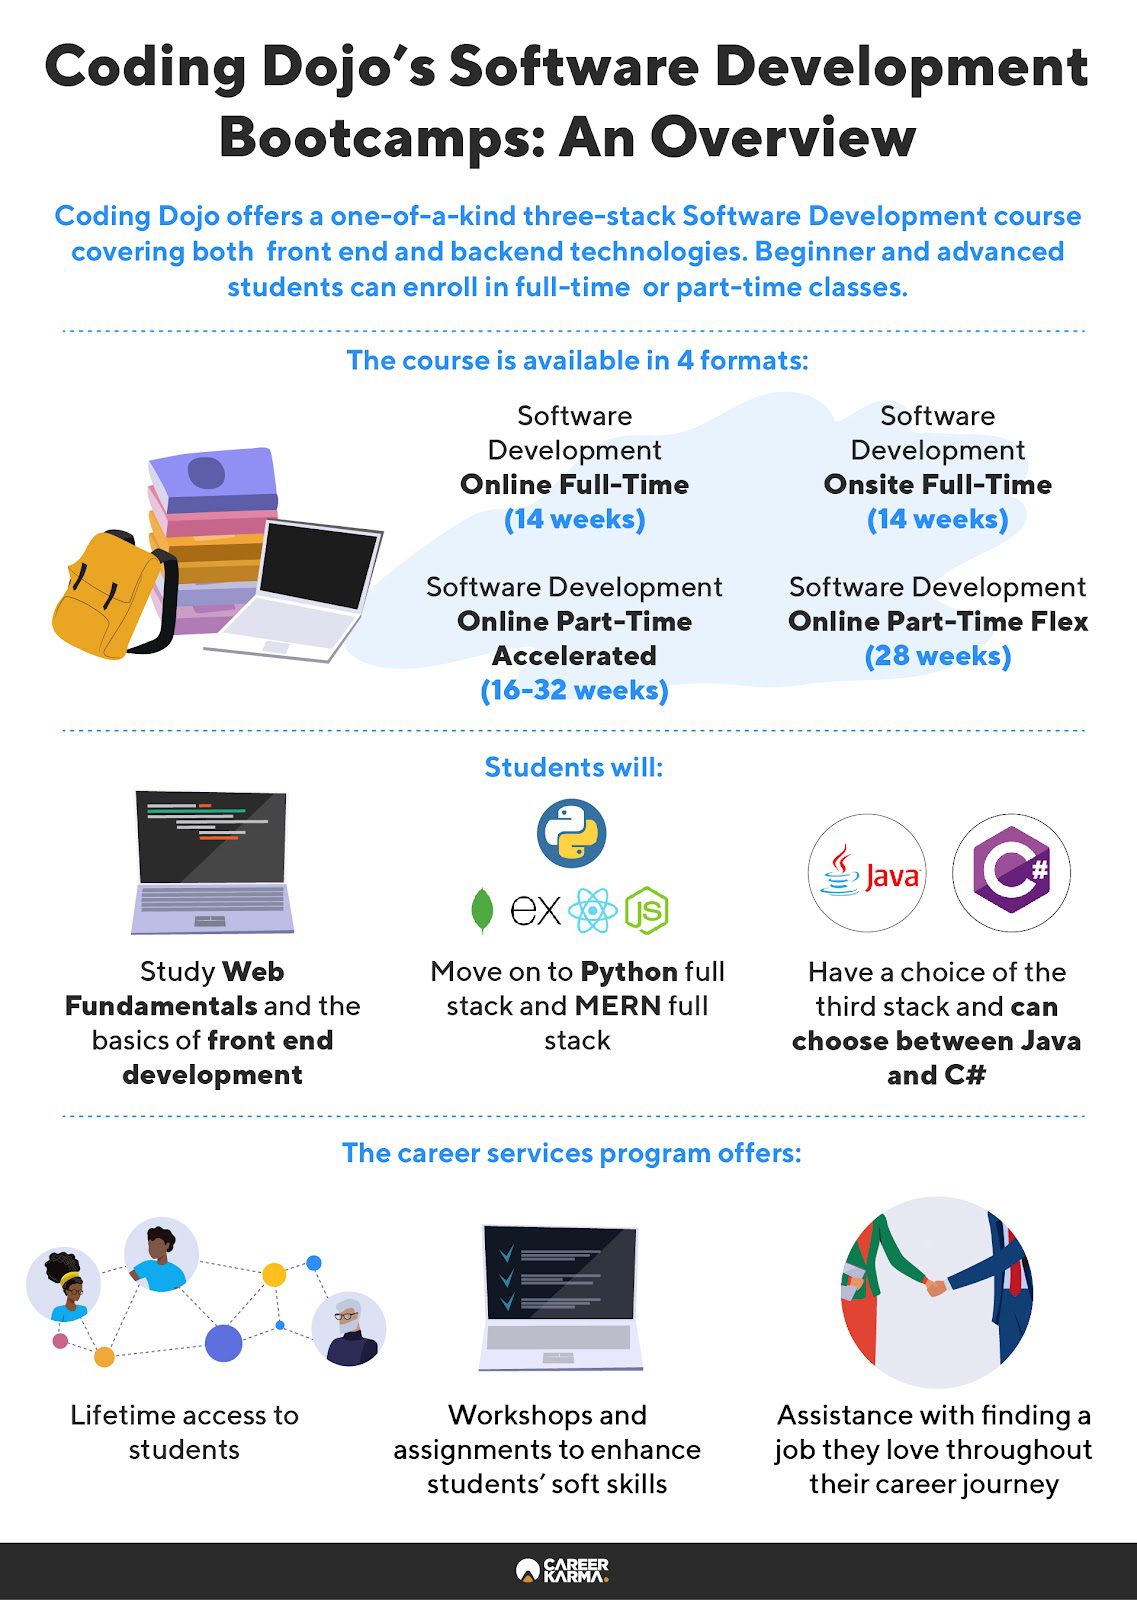 An infographic showing Coding Dojo’s course catalog